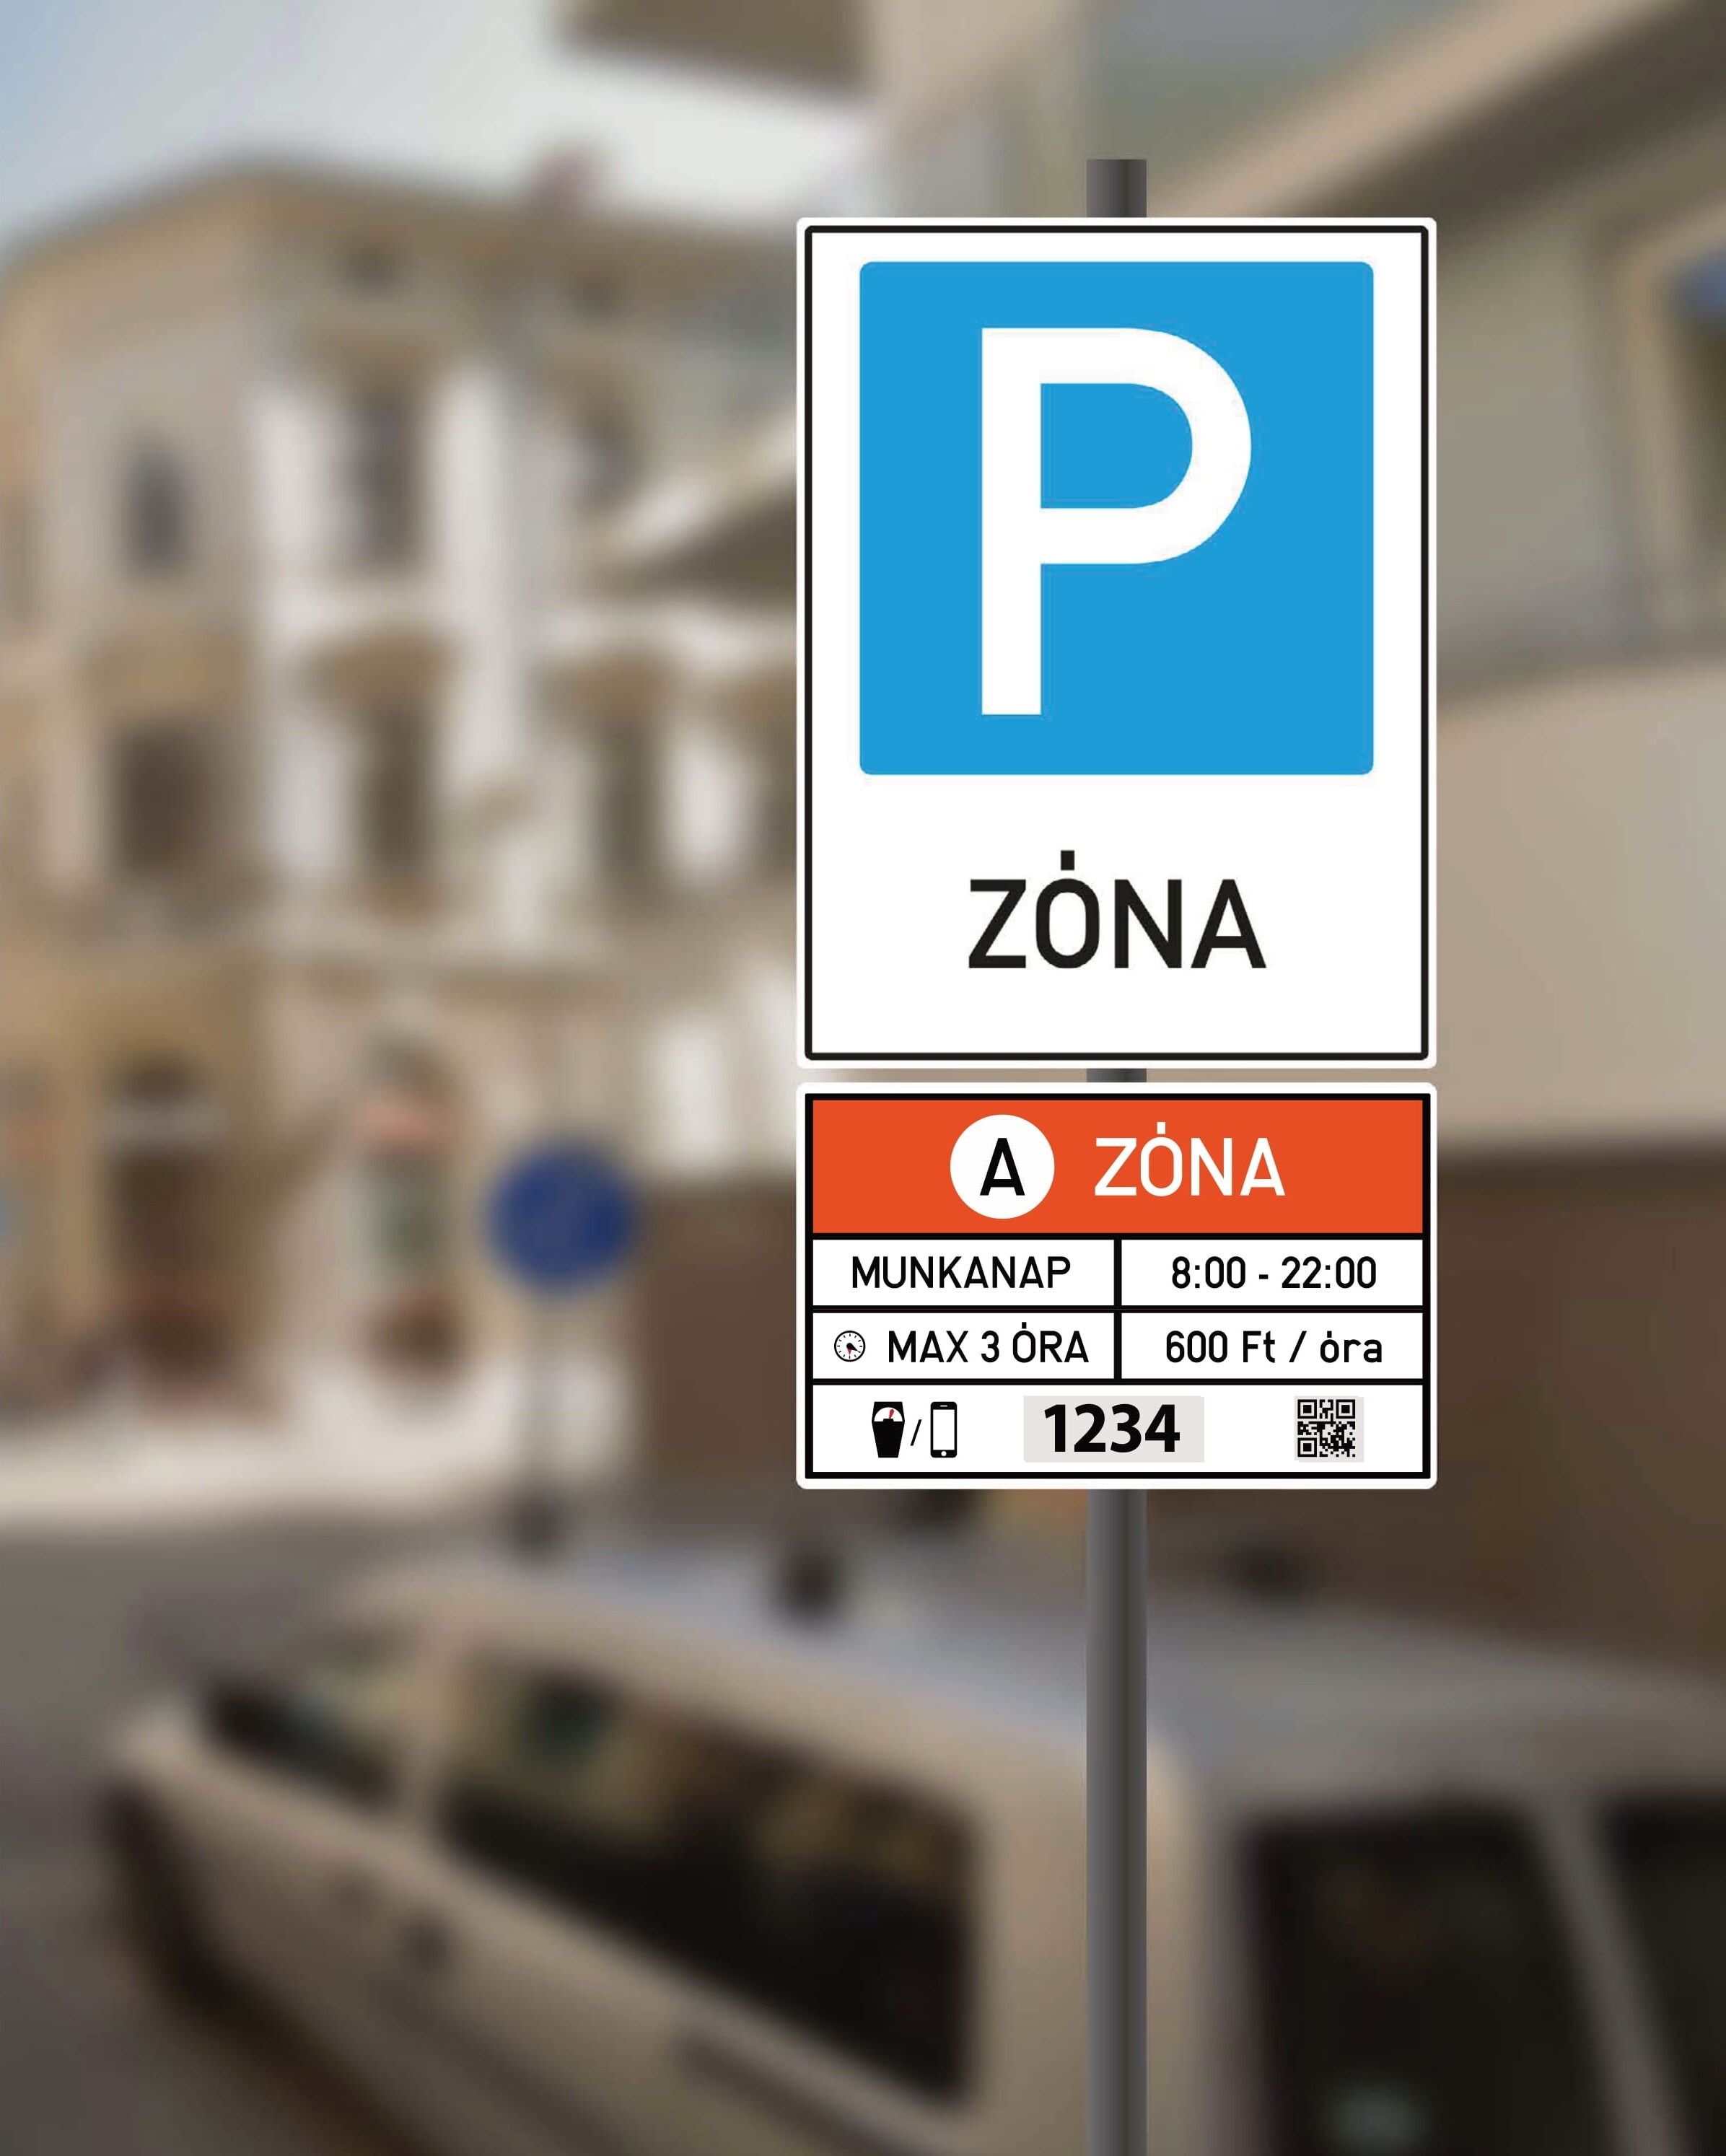 A parking zone